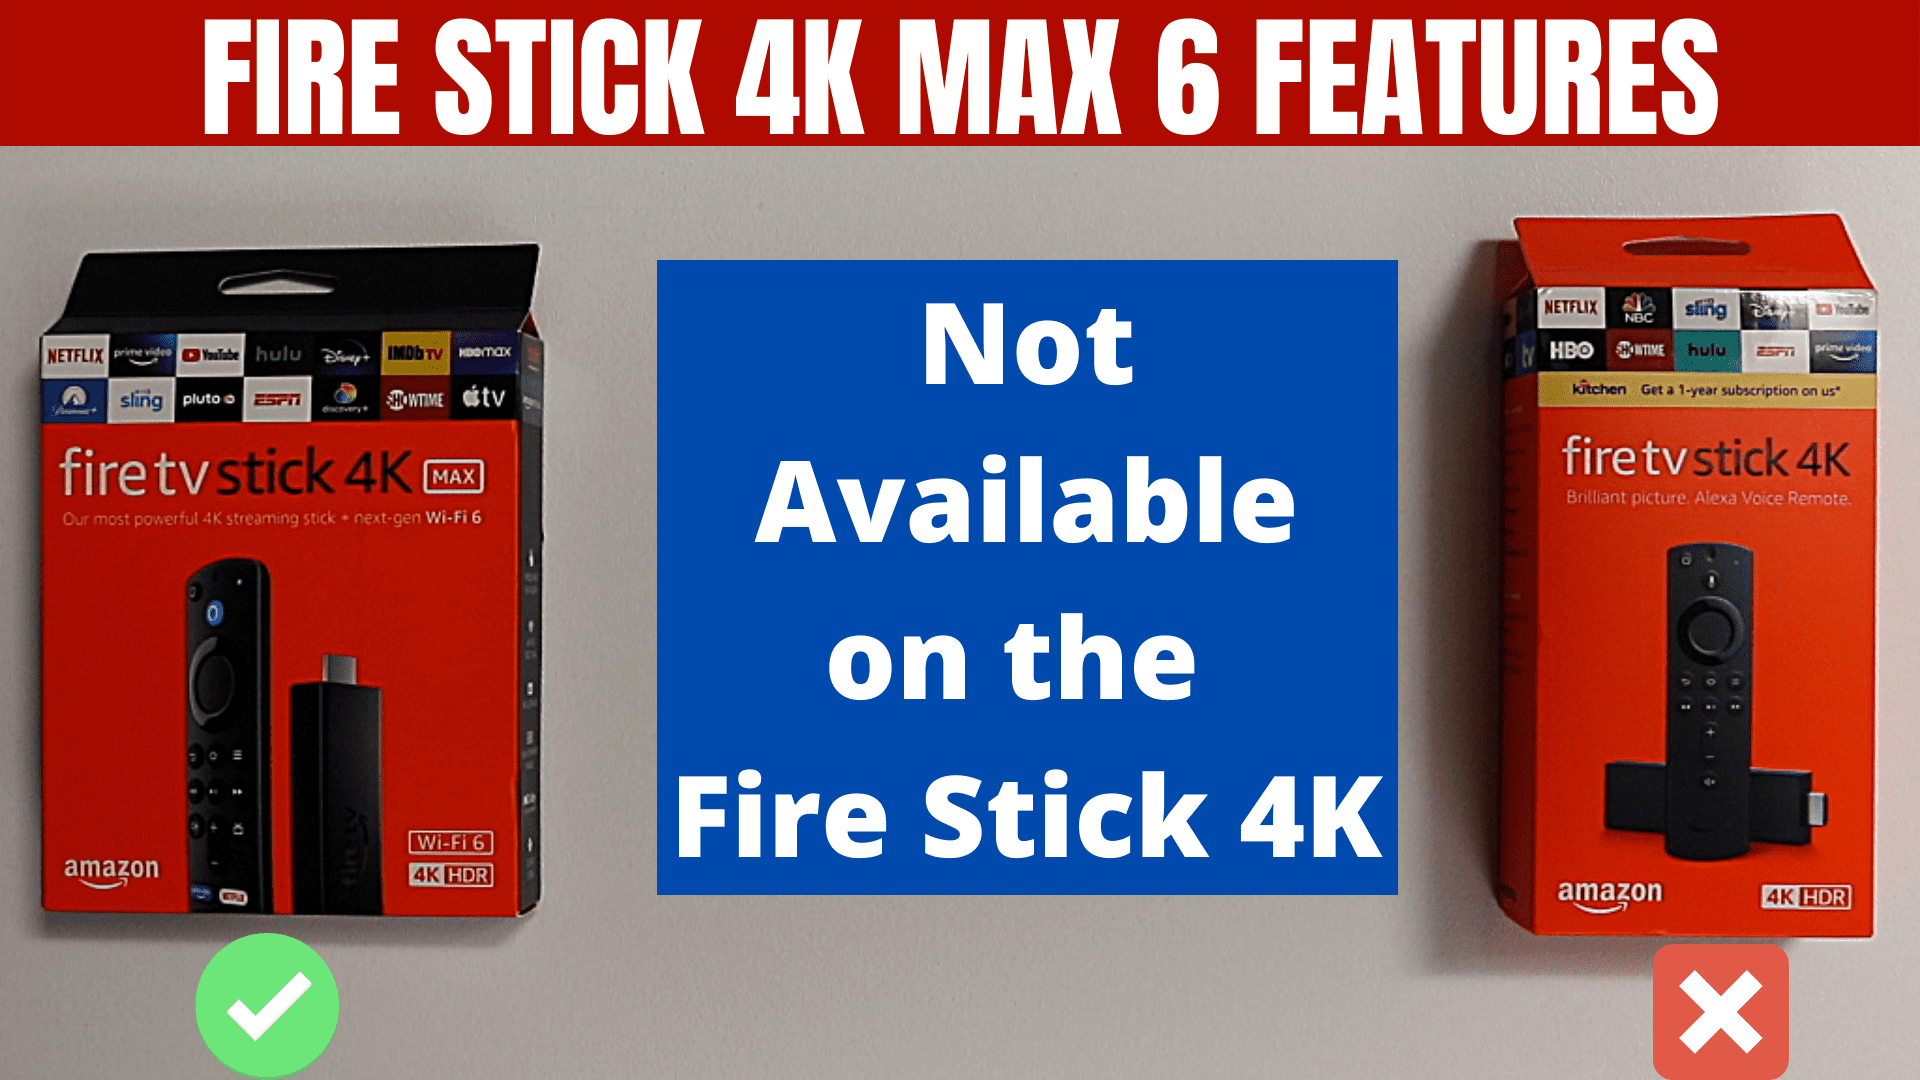 4K Max 6 new features not on the 4K Stick